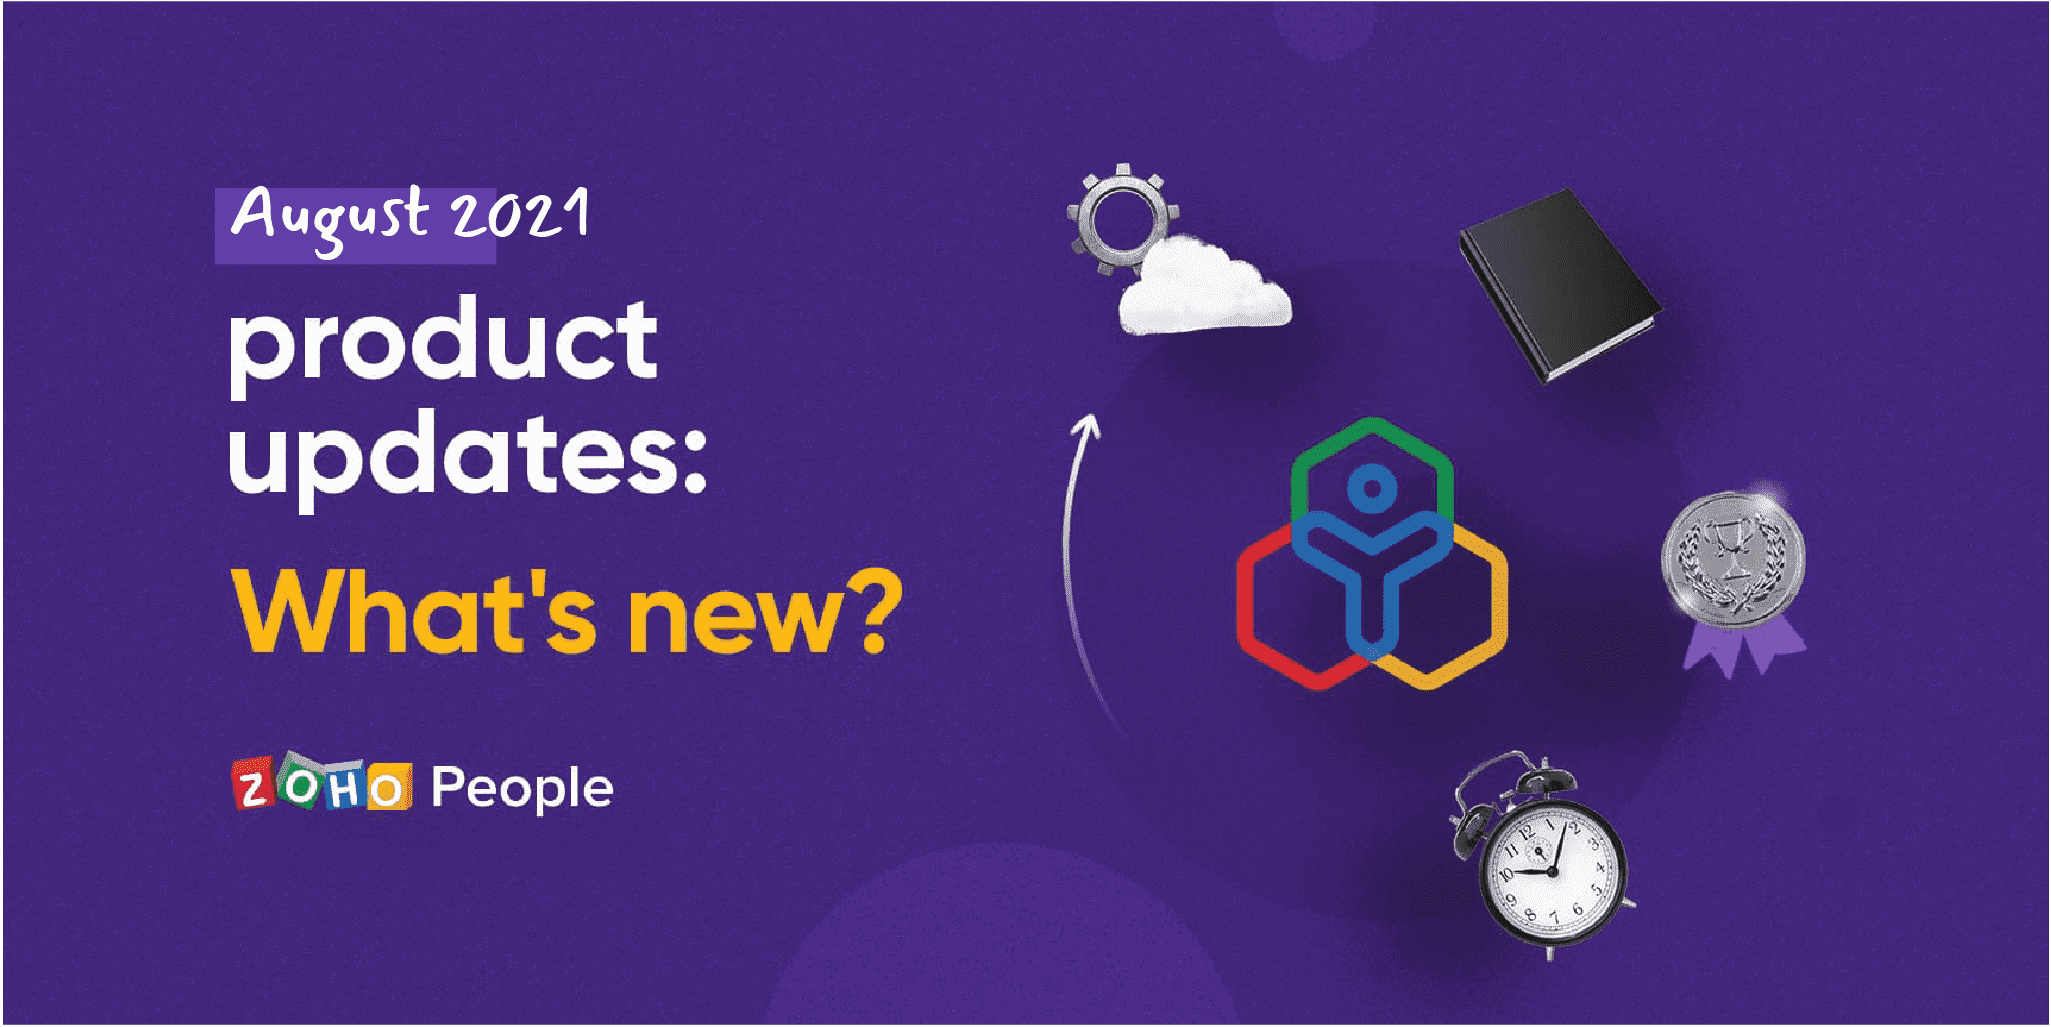 Zoho People product updates: August 2021